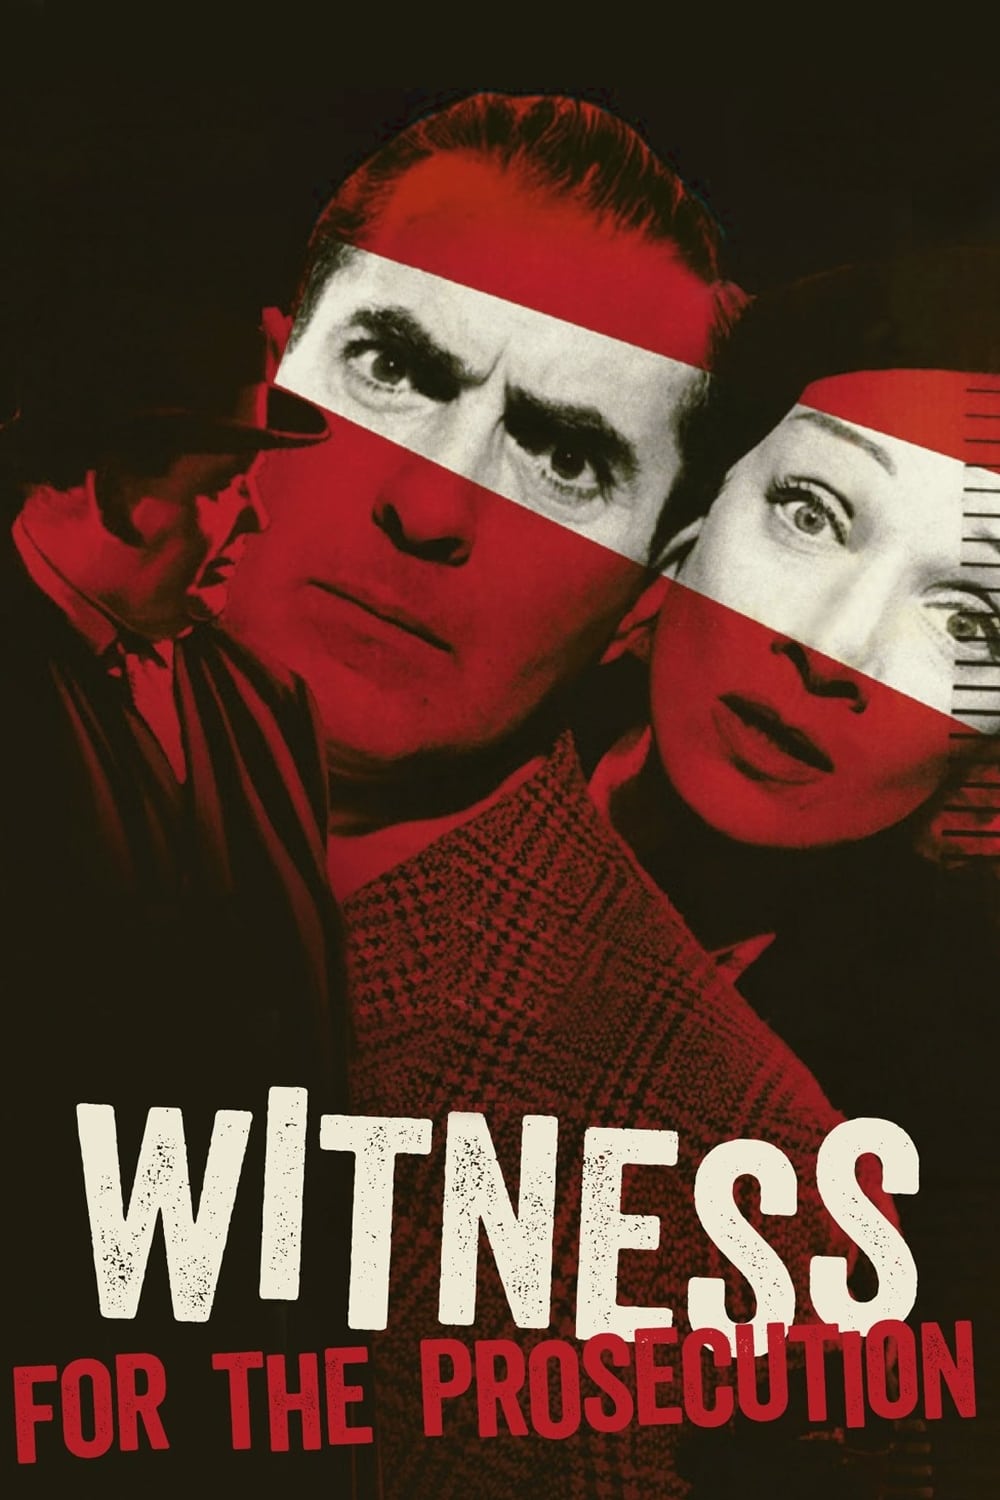 Witness for the Prosecution (1957)